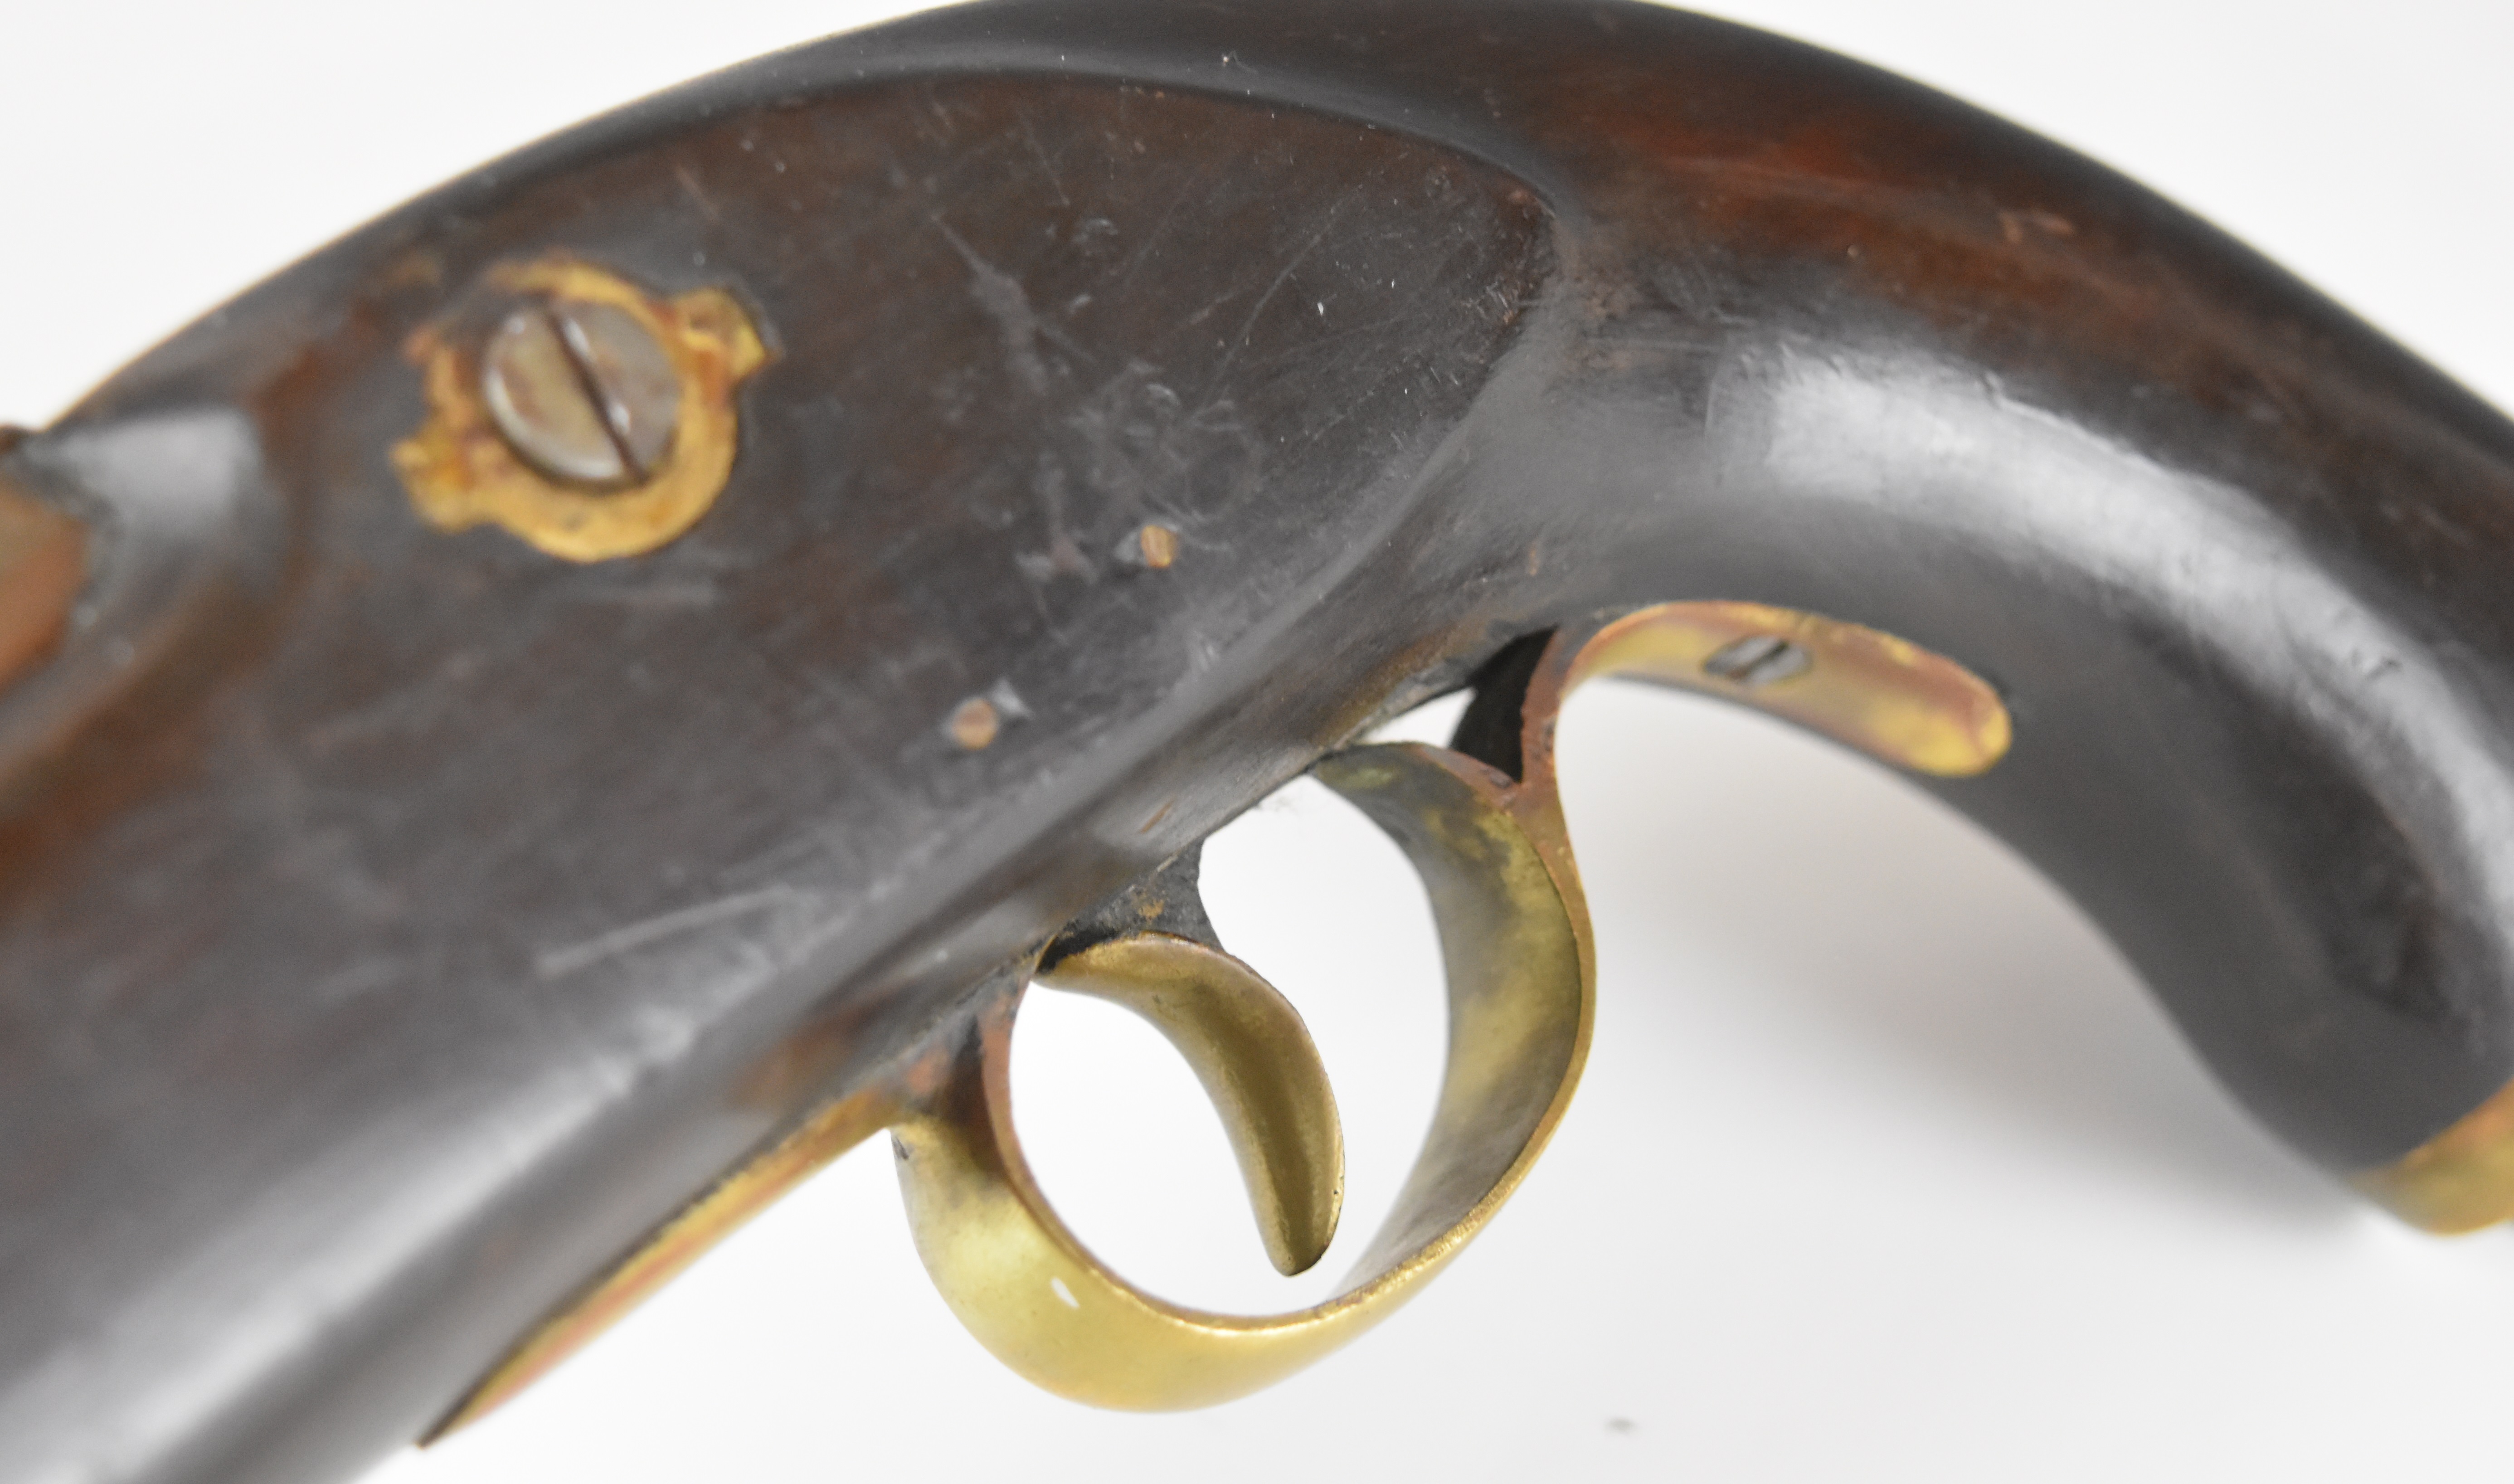 Enfield percussion hammer action sea-service pistol with lock stamped '1858 Enfield' brass trigger - Image 7 of 12